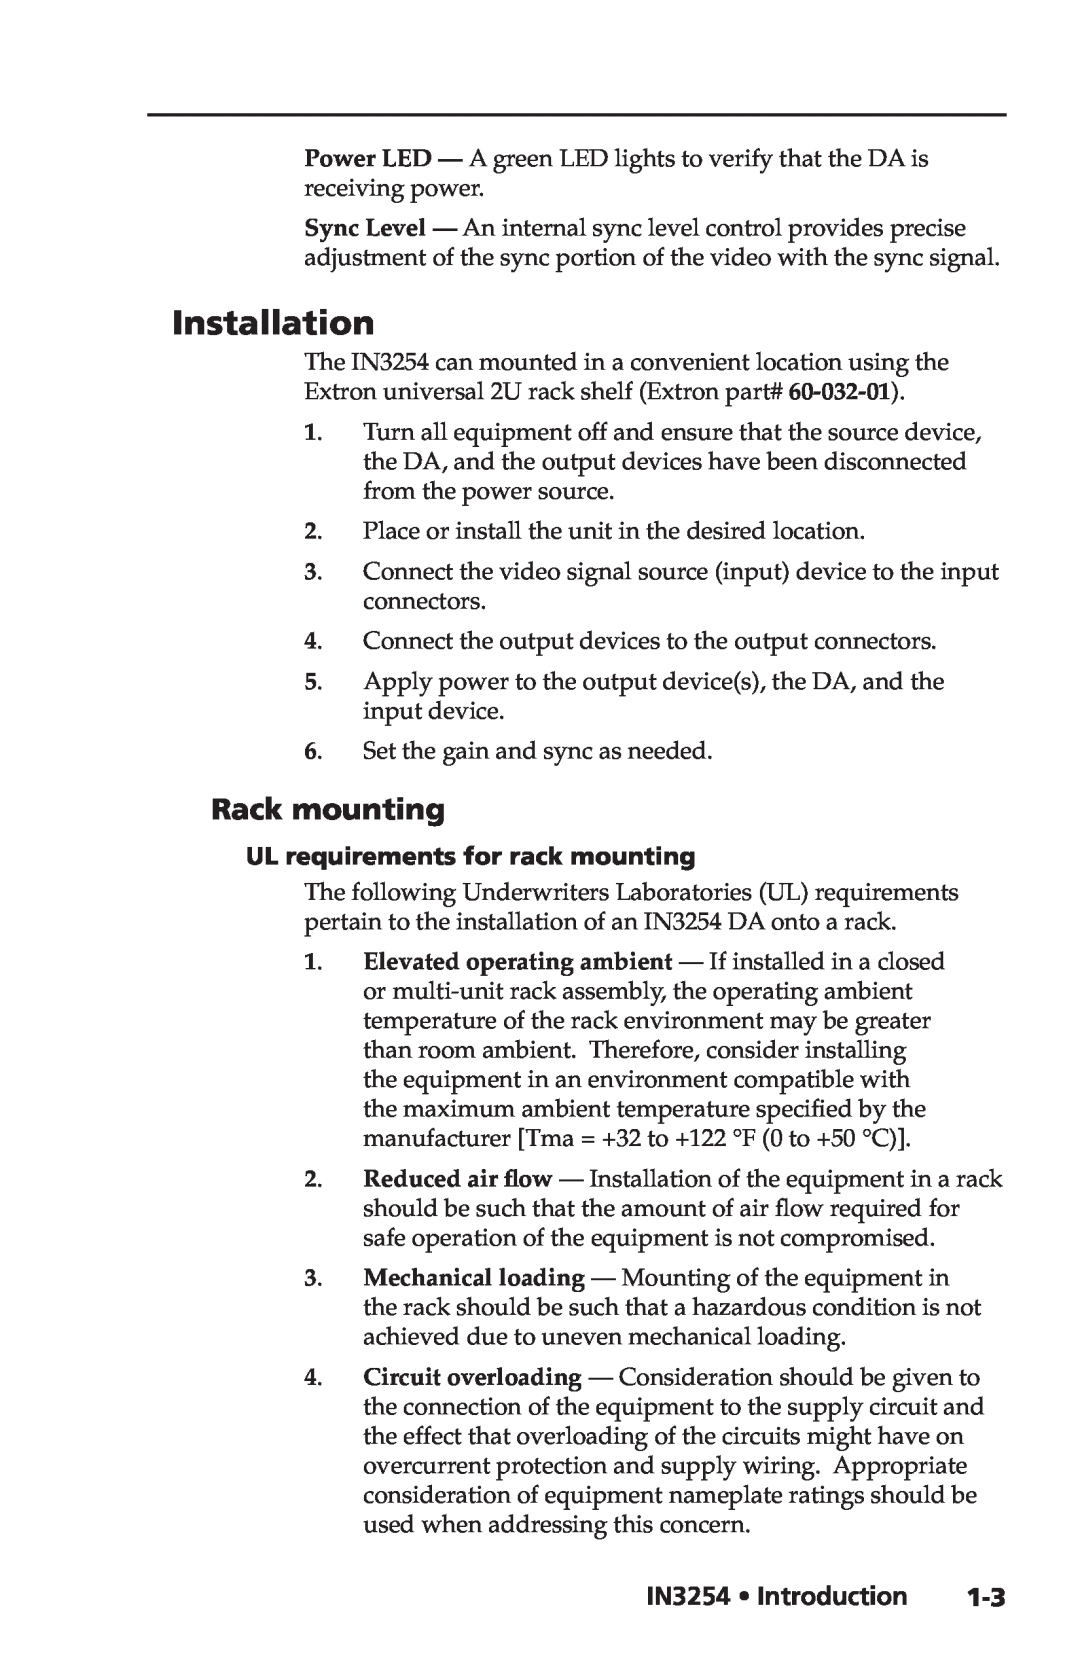 Extron electronic user manual Installation, Rack mounting, IN3254 Introduction, UL requirements for rack mounting 